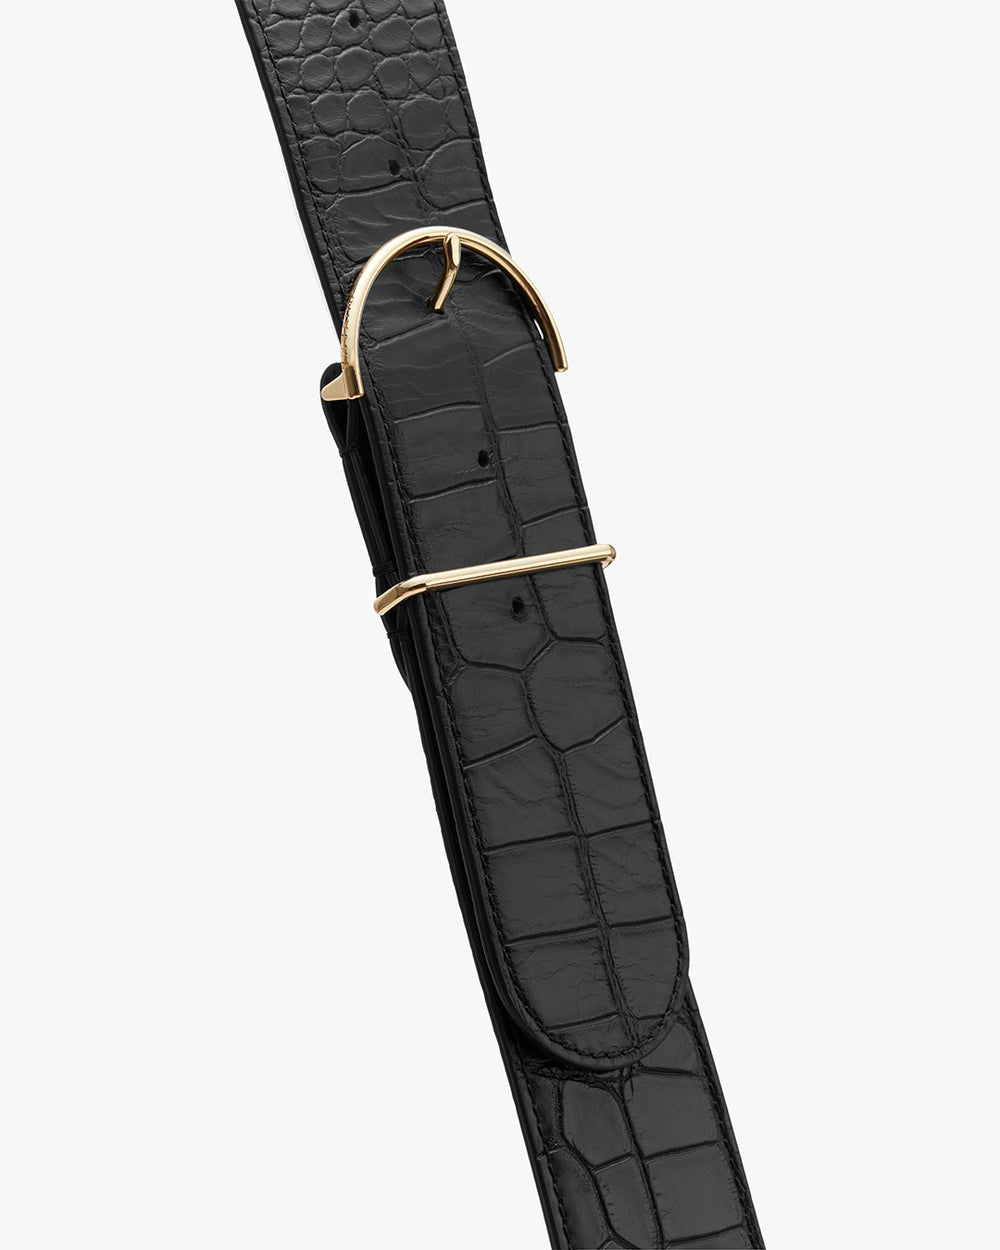 Watch strap with a metal buckle.